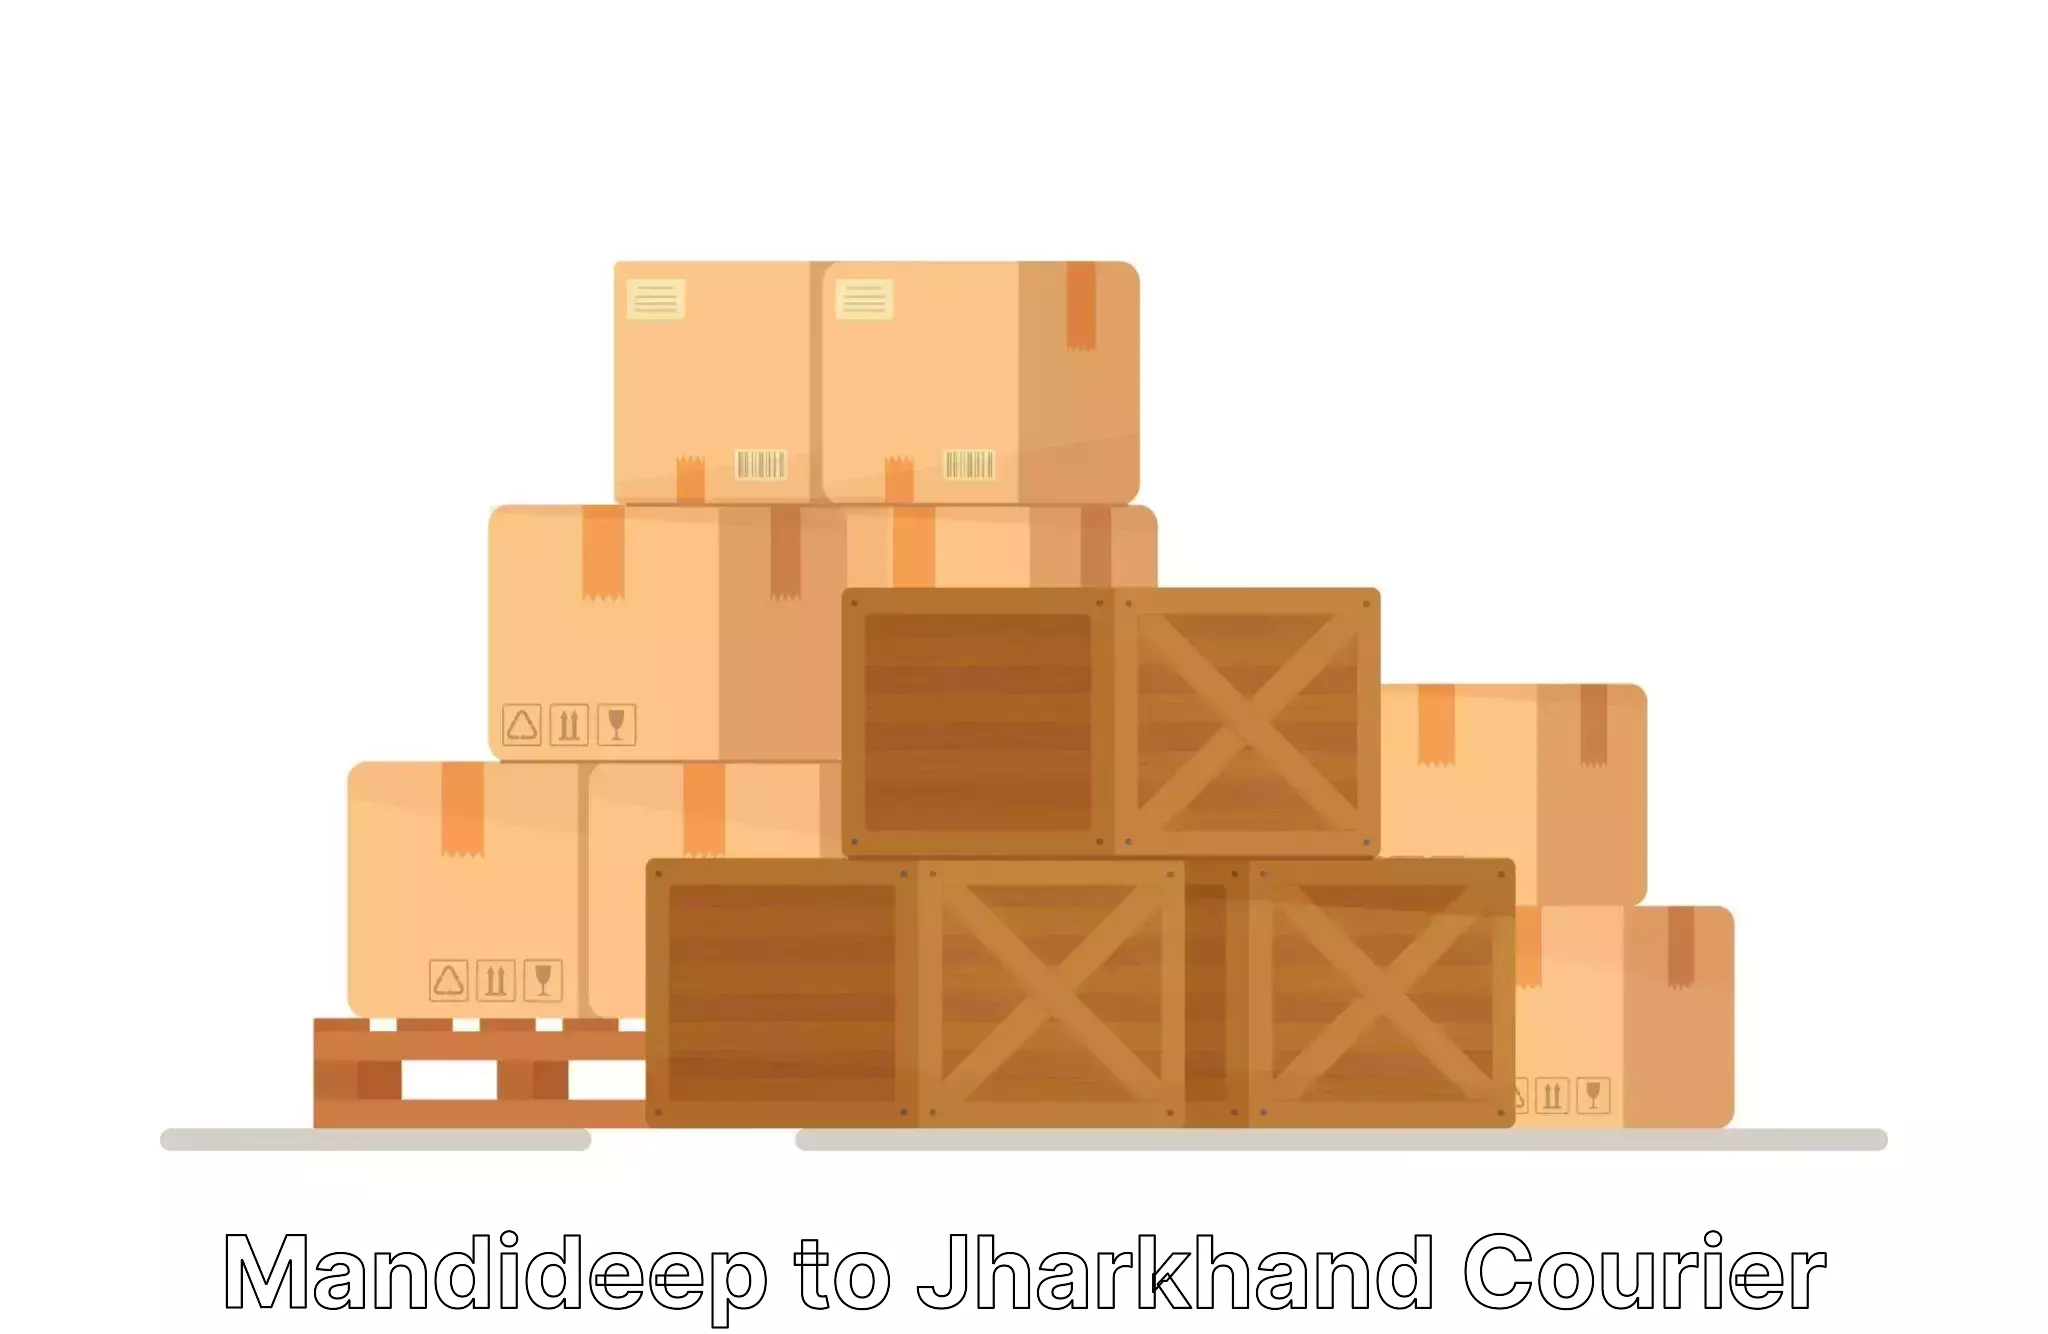 Quality relocation services in Mandideep to Tisri